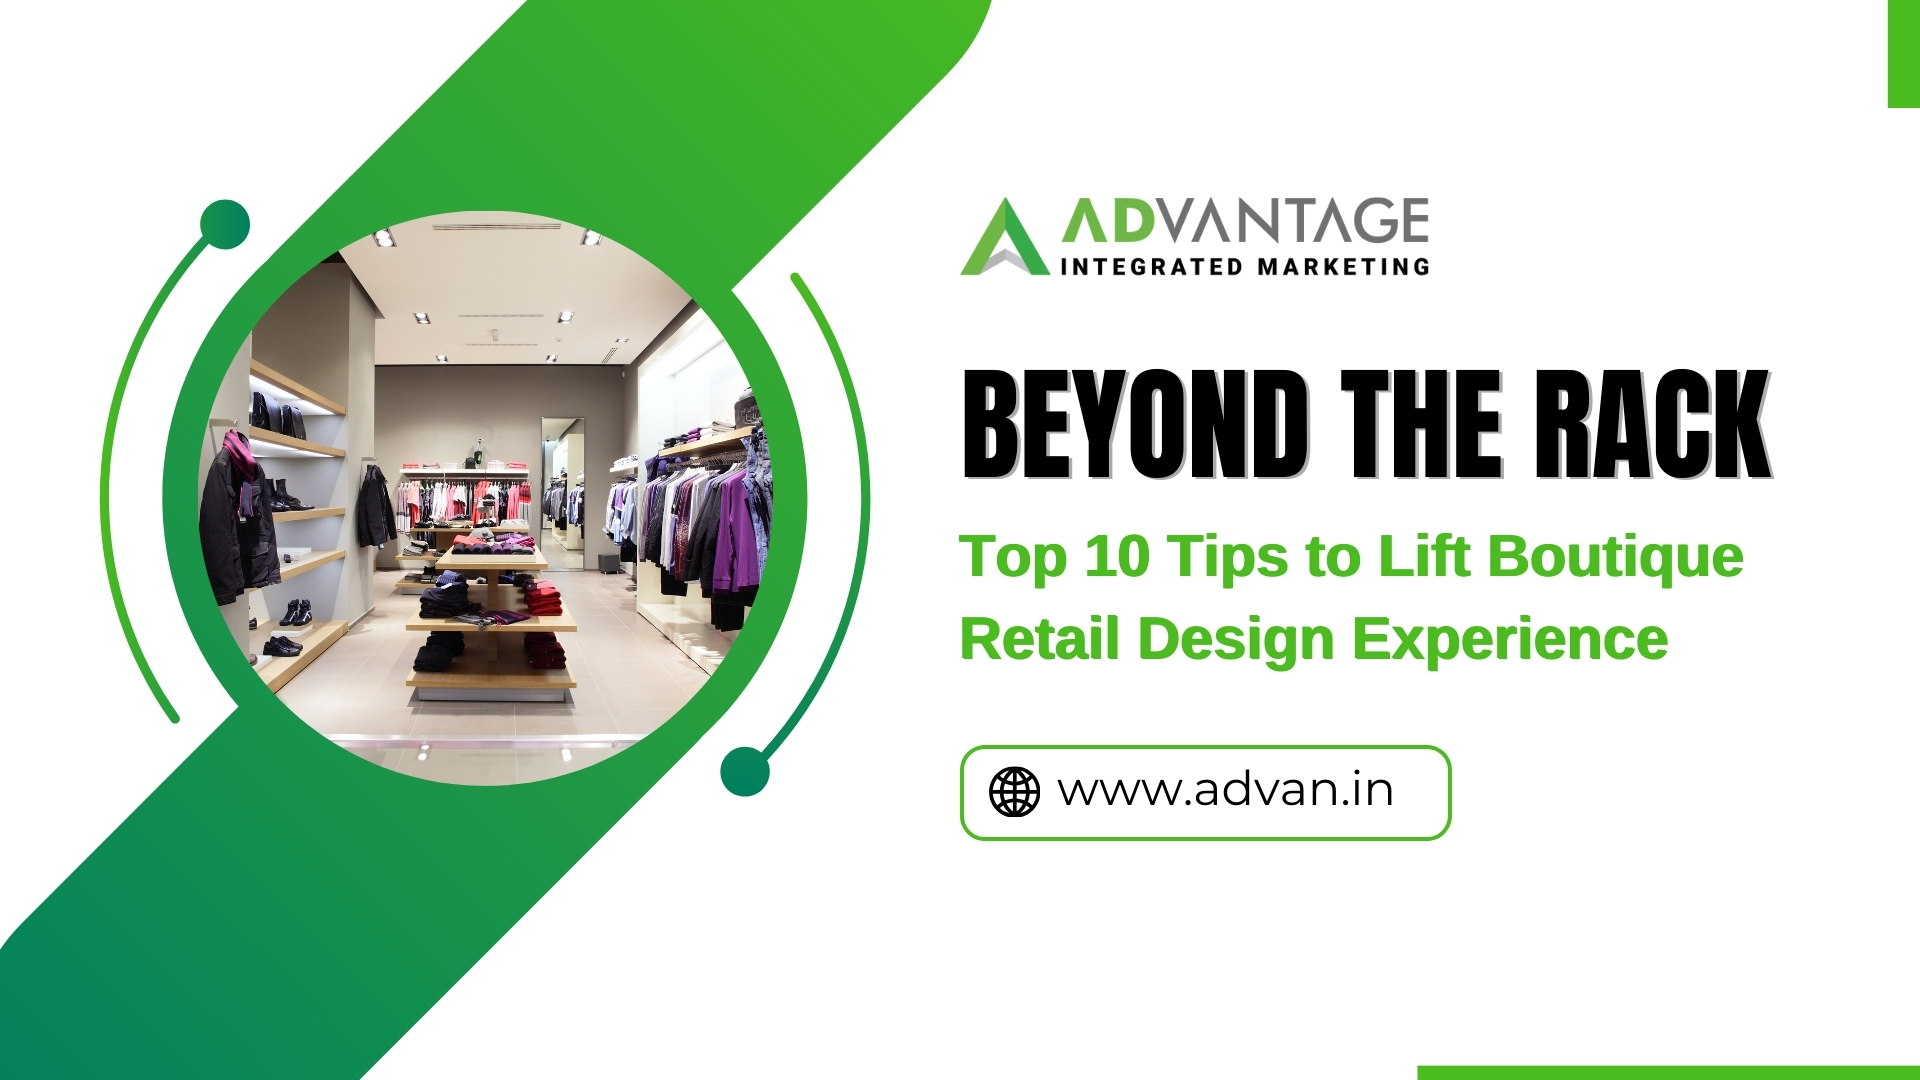 Beyond the Rack: Top 10 Tips to Lift Boutique Retail Design Experience